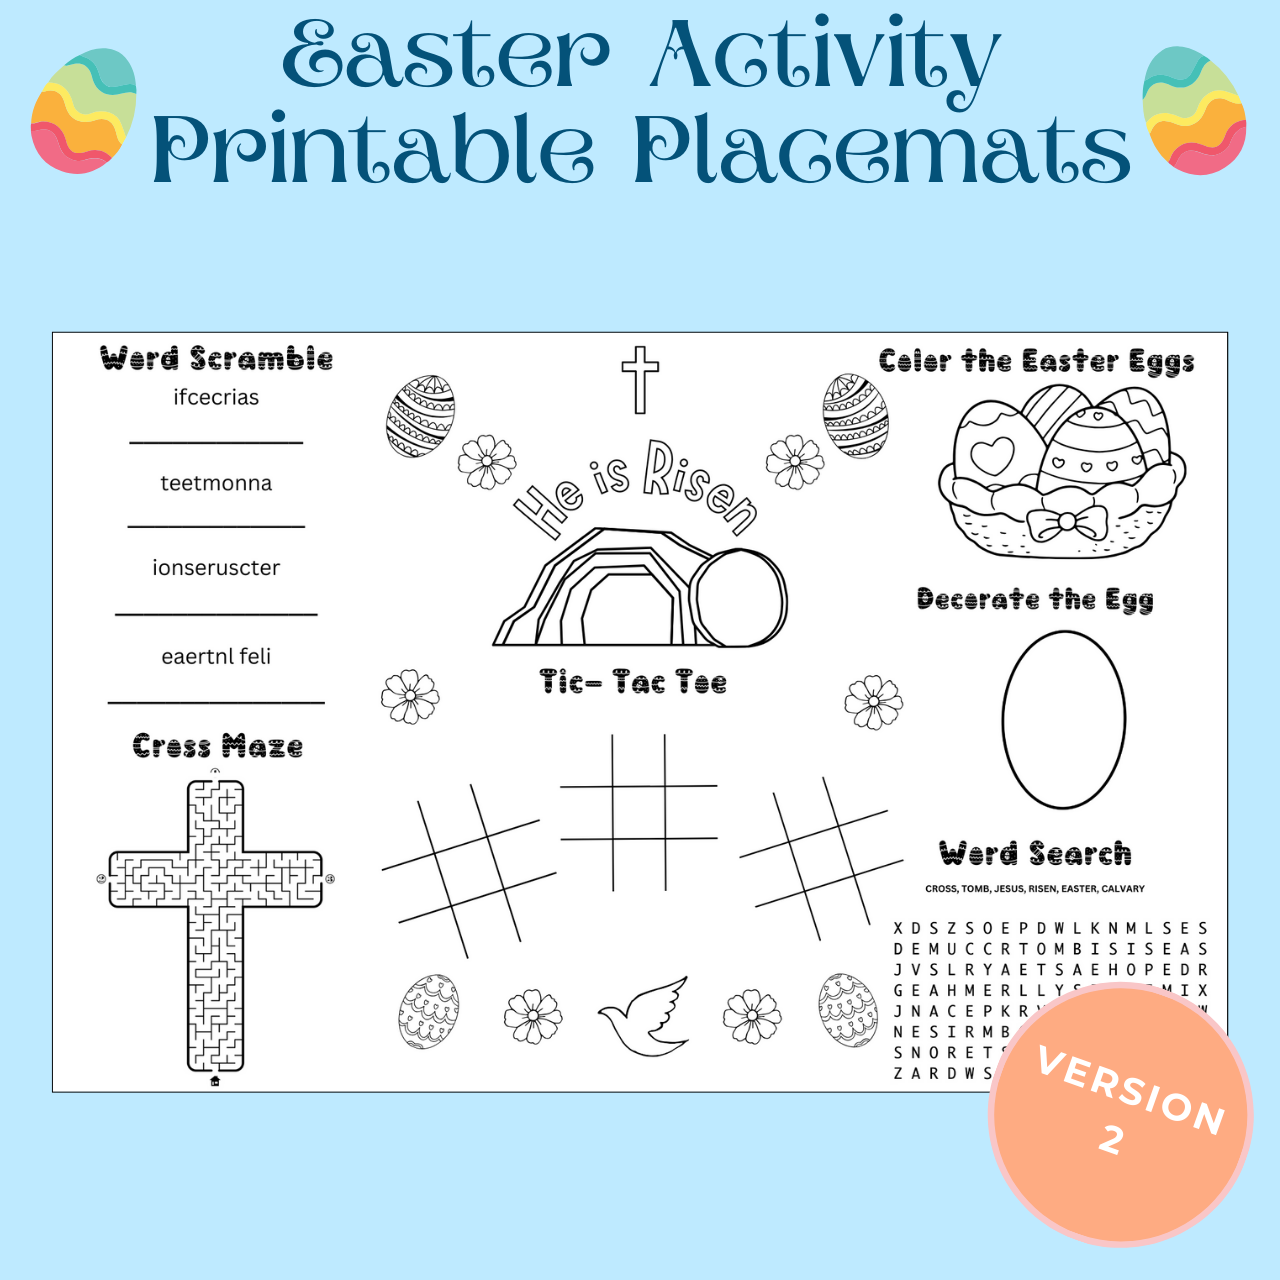 Christian Easter Activity Placemat | Easter Placemat Activity Sheet | Christian Easter Kids Activities | 8.5x11 in & 11x17 in